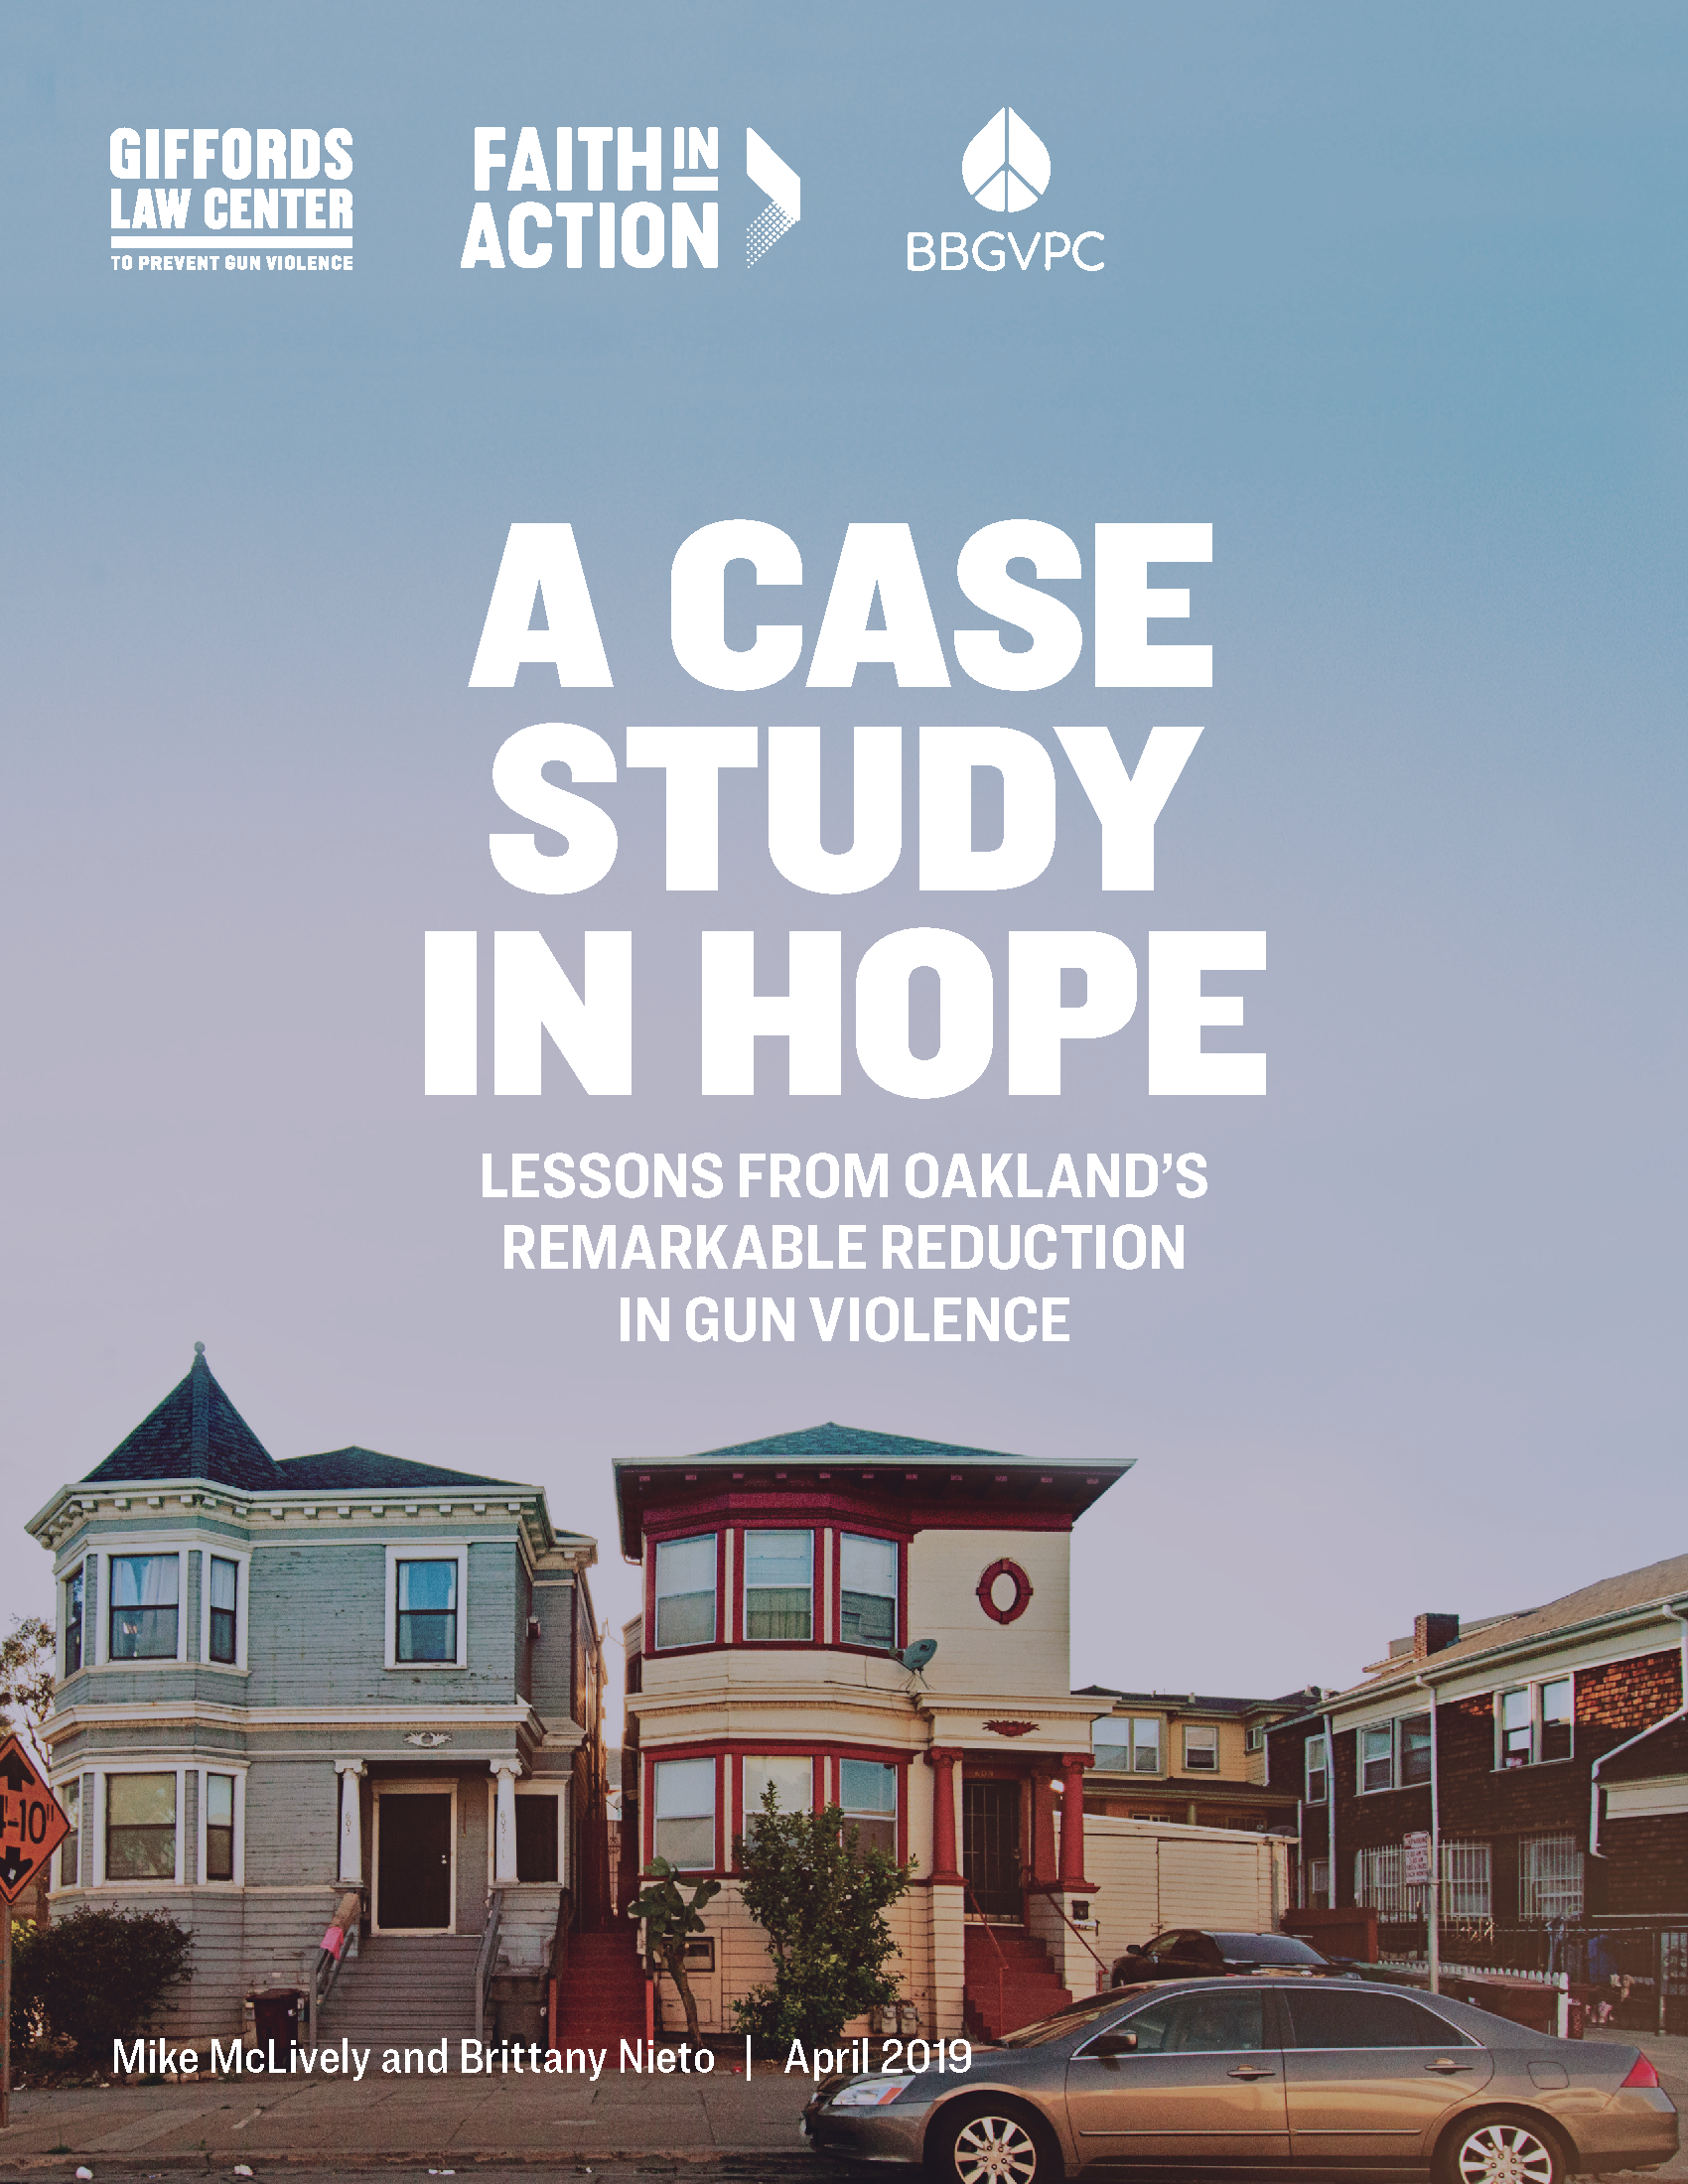 A Case Study in Hope: Lessons from Oakland's Remarkable Reduction in Gun Violence